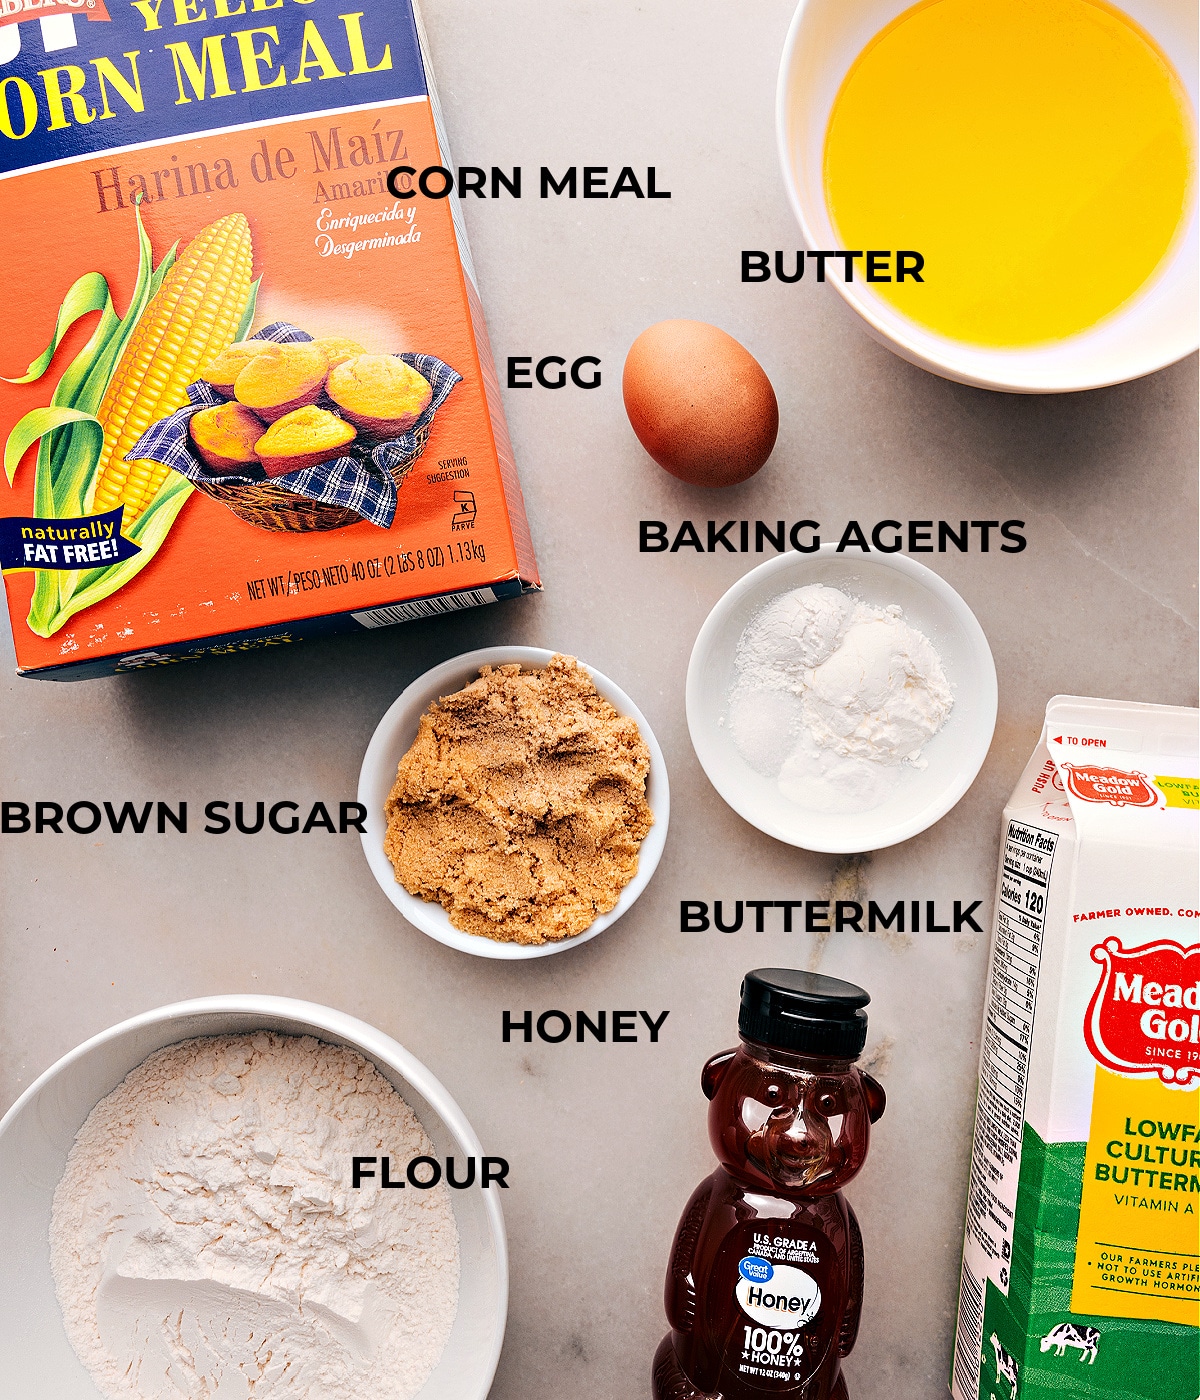 Ingredients for cornbread muffin recipe displayed, including corn meal, brown sugar, flour, buttermilk, and more.